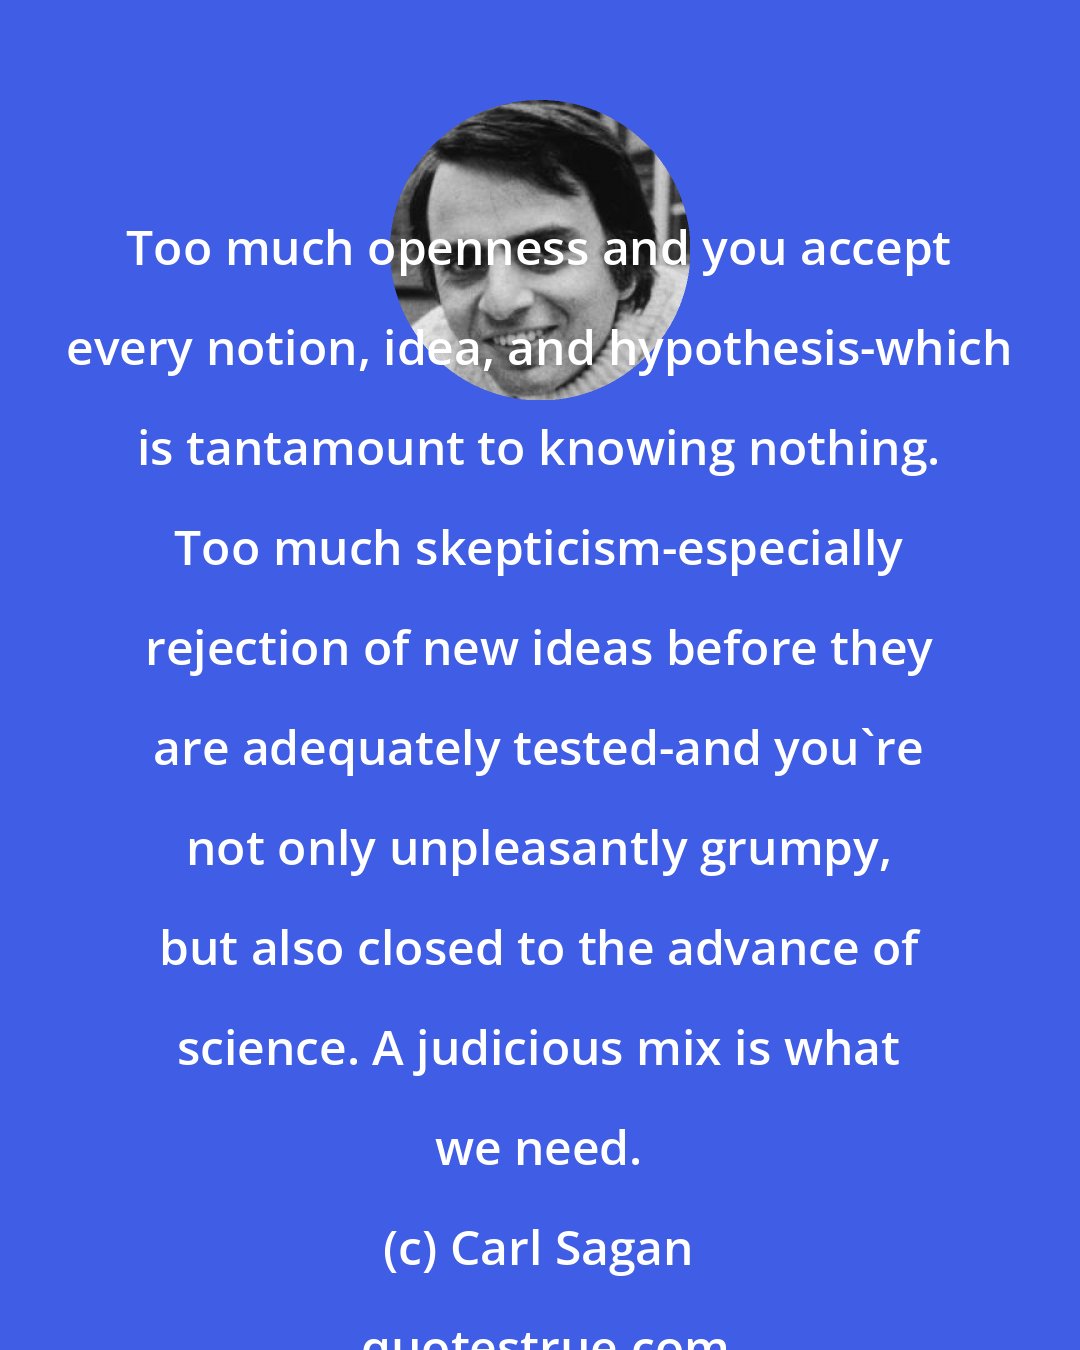 Carl Sagan: Too much openness and you accept every notion, idea, and hypothesis-which is tantamount to knowing nothing. Too much skepticism-especially rejection of new ideas before they are adequately tested-and you're not only unpleasantly grumpy, but also closed to the advance of science. A judicious mix is what we need.